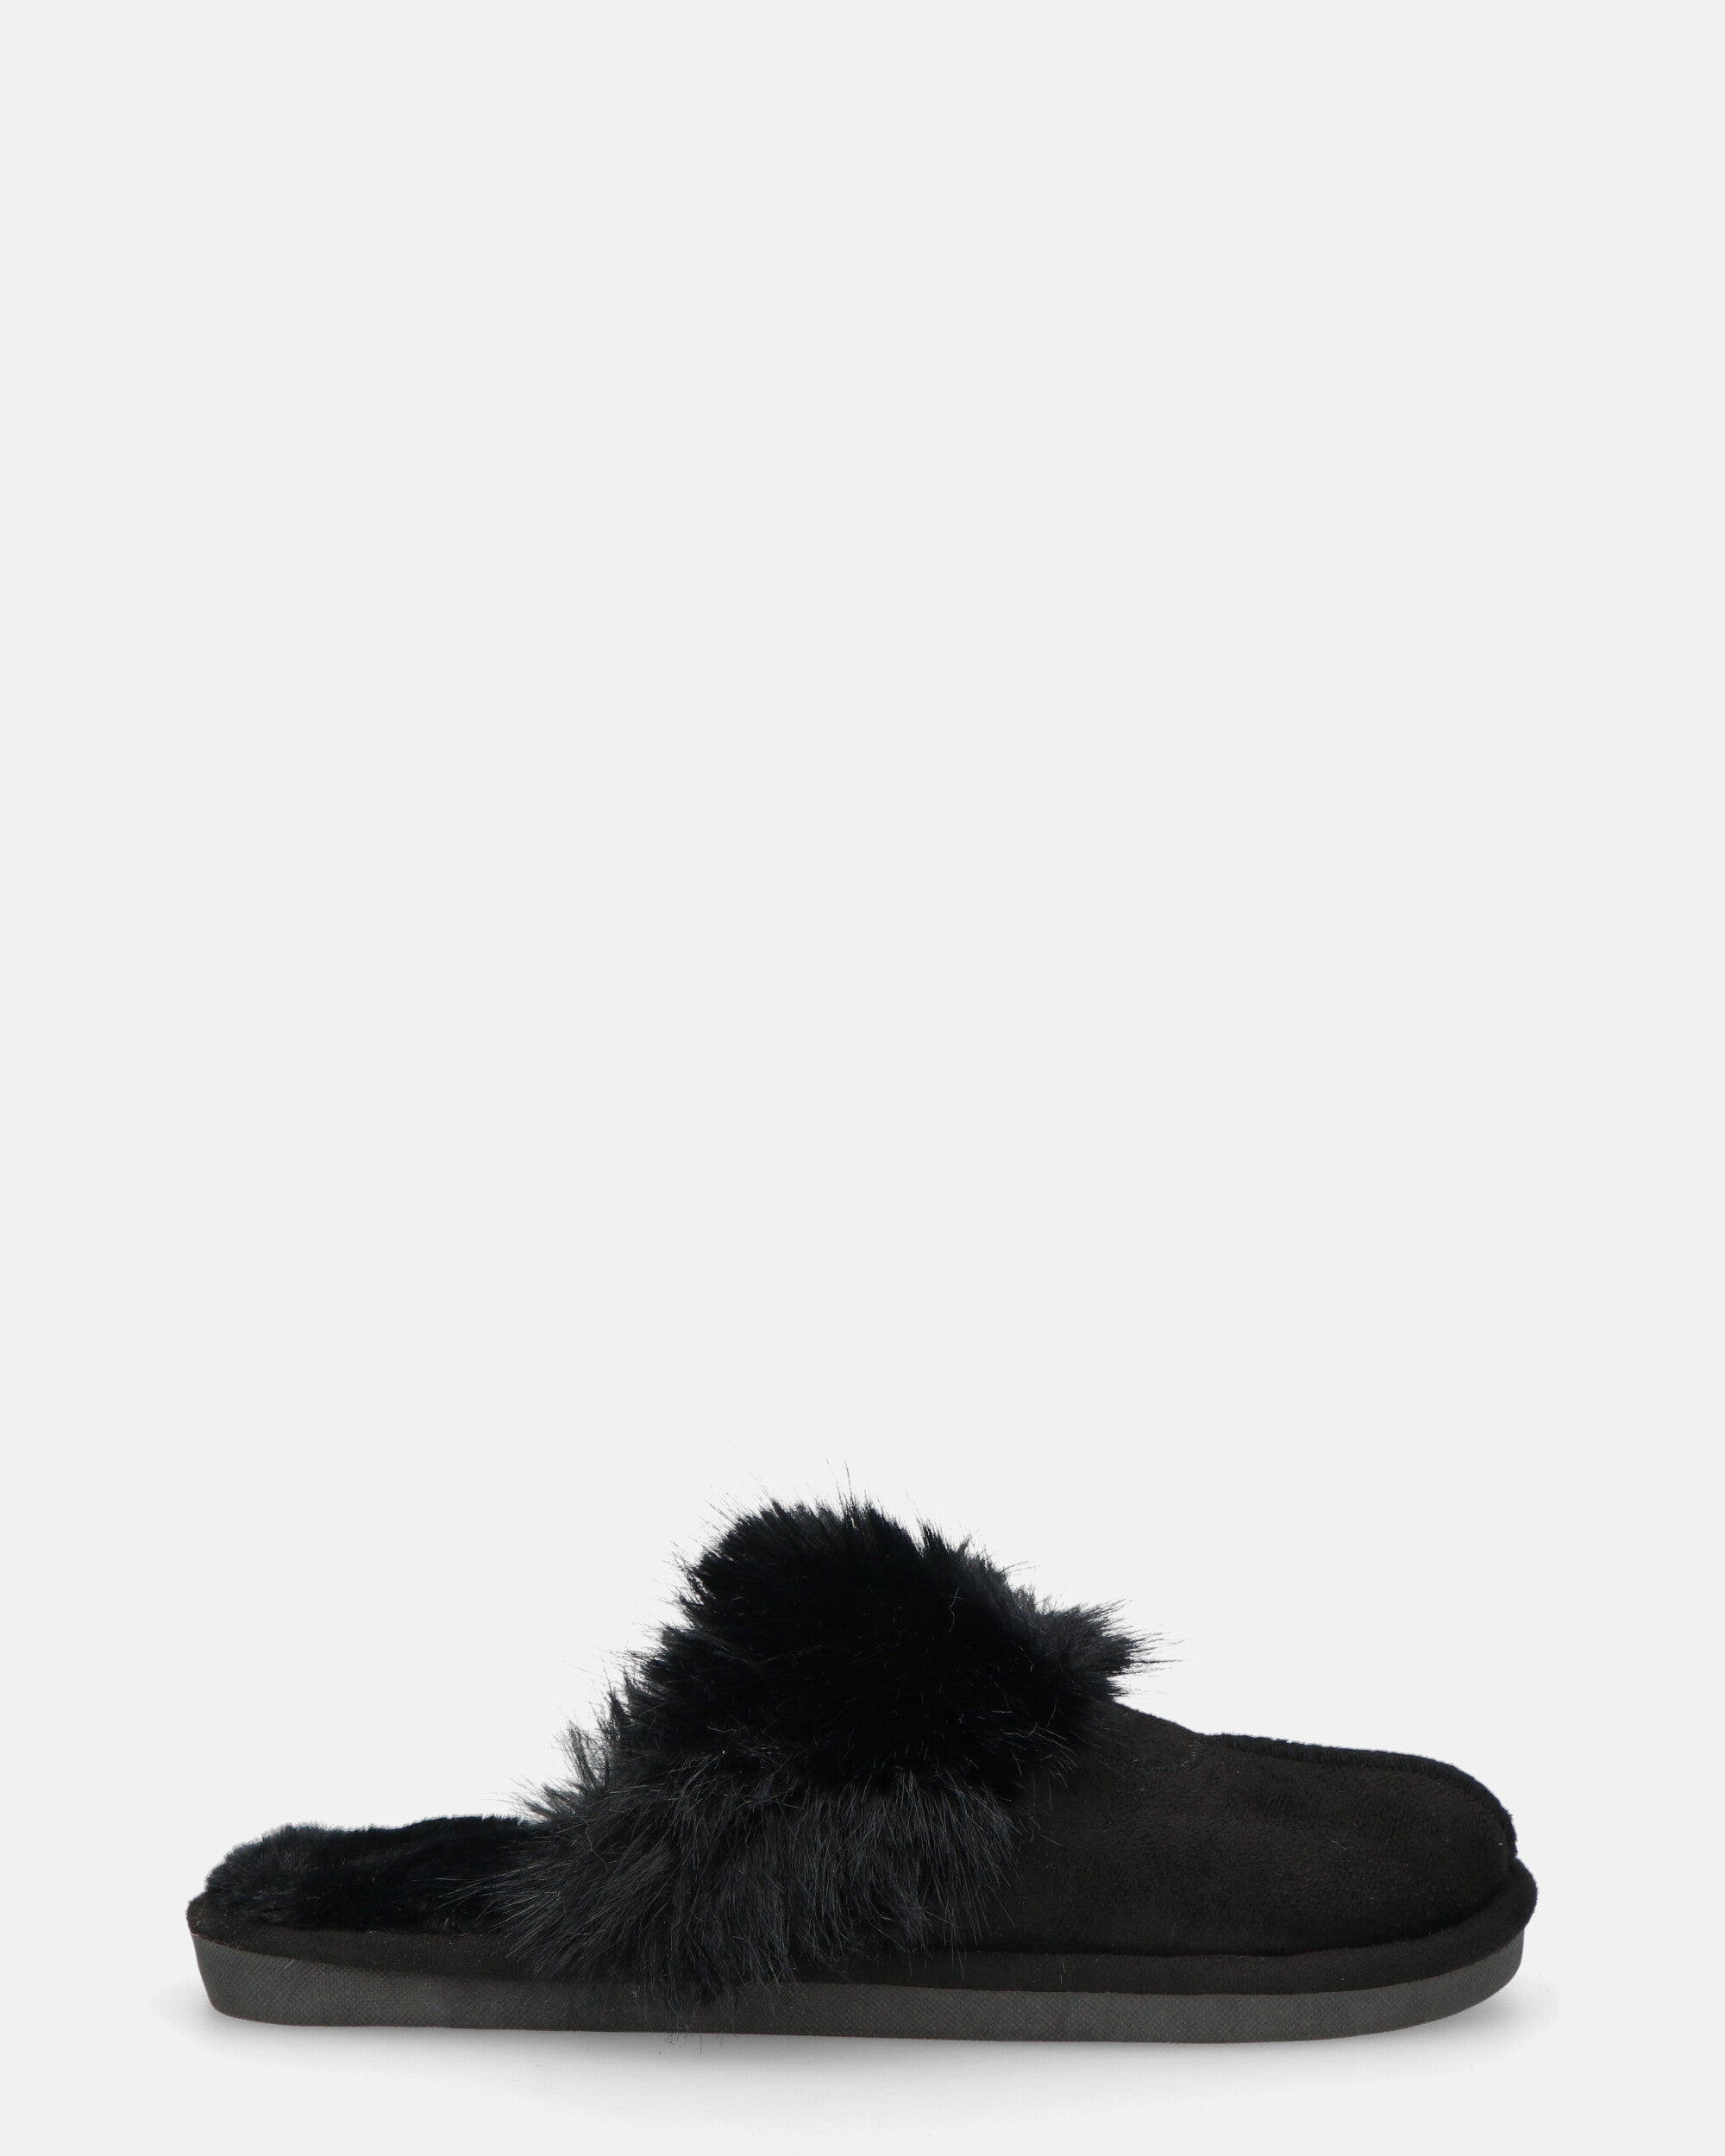 MIDORI - black slippers with fur and suede